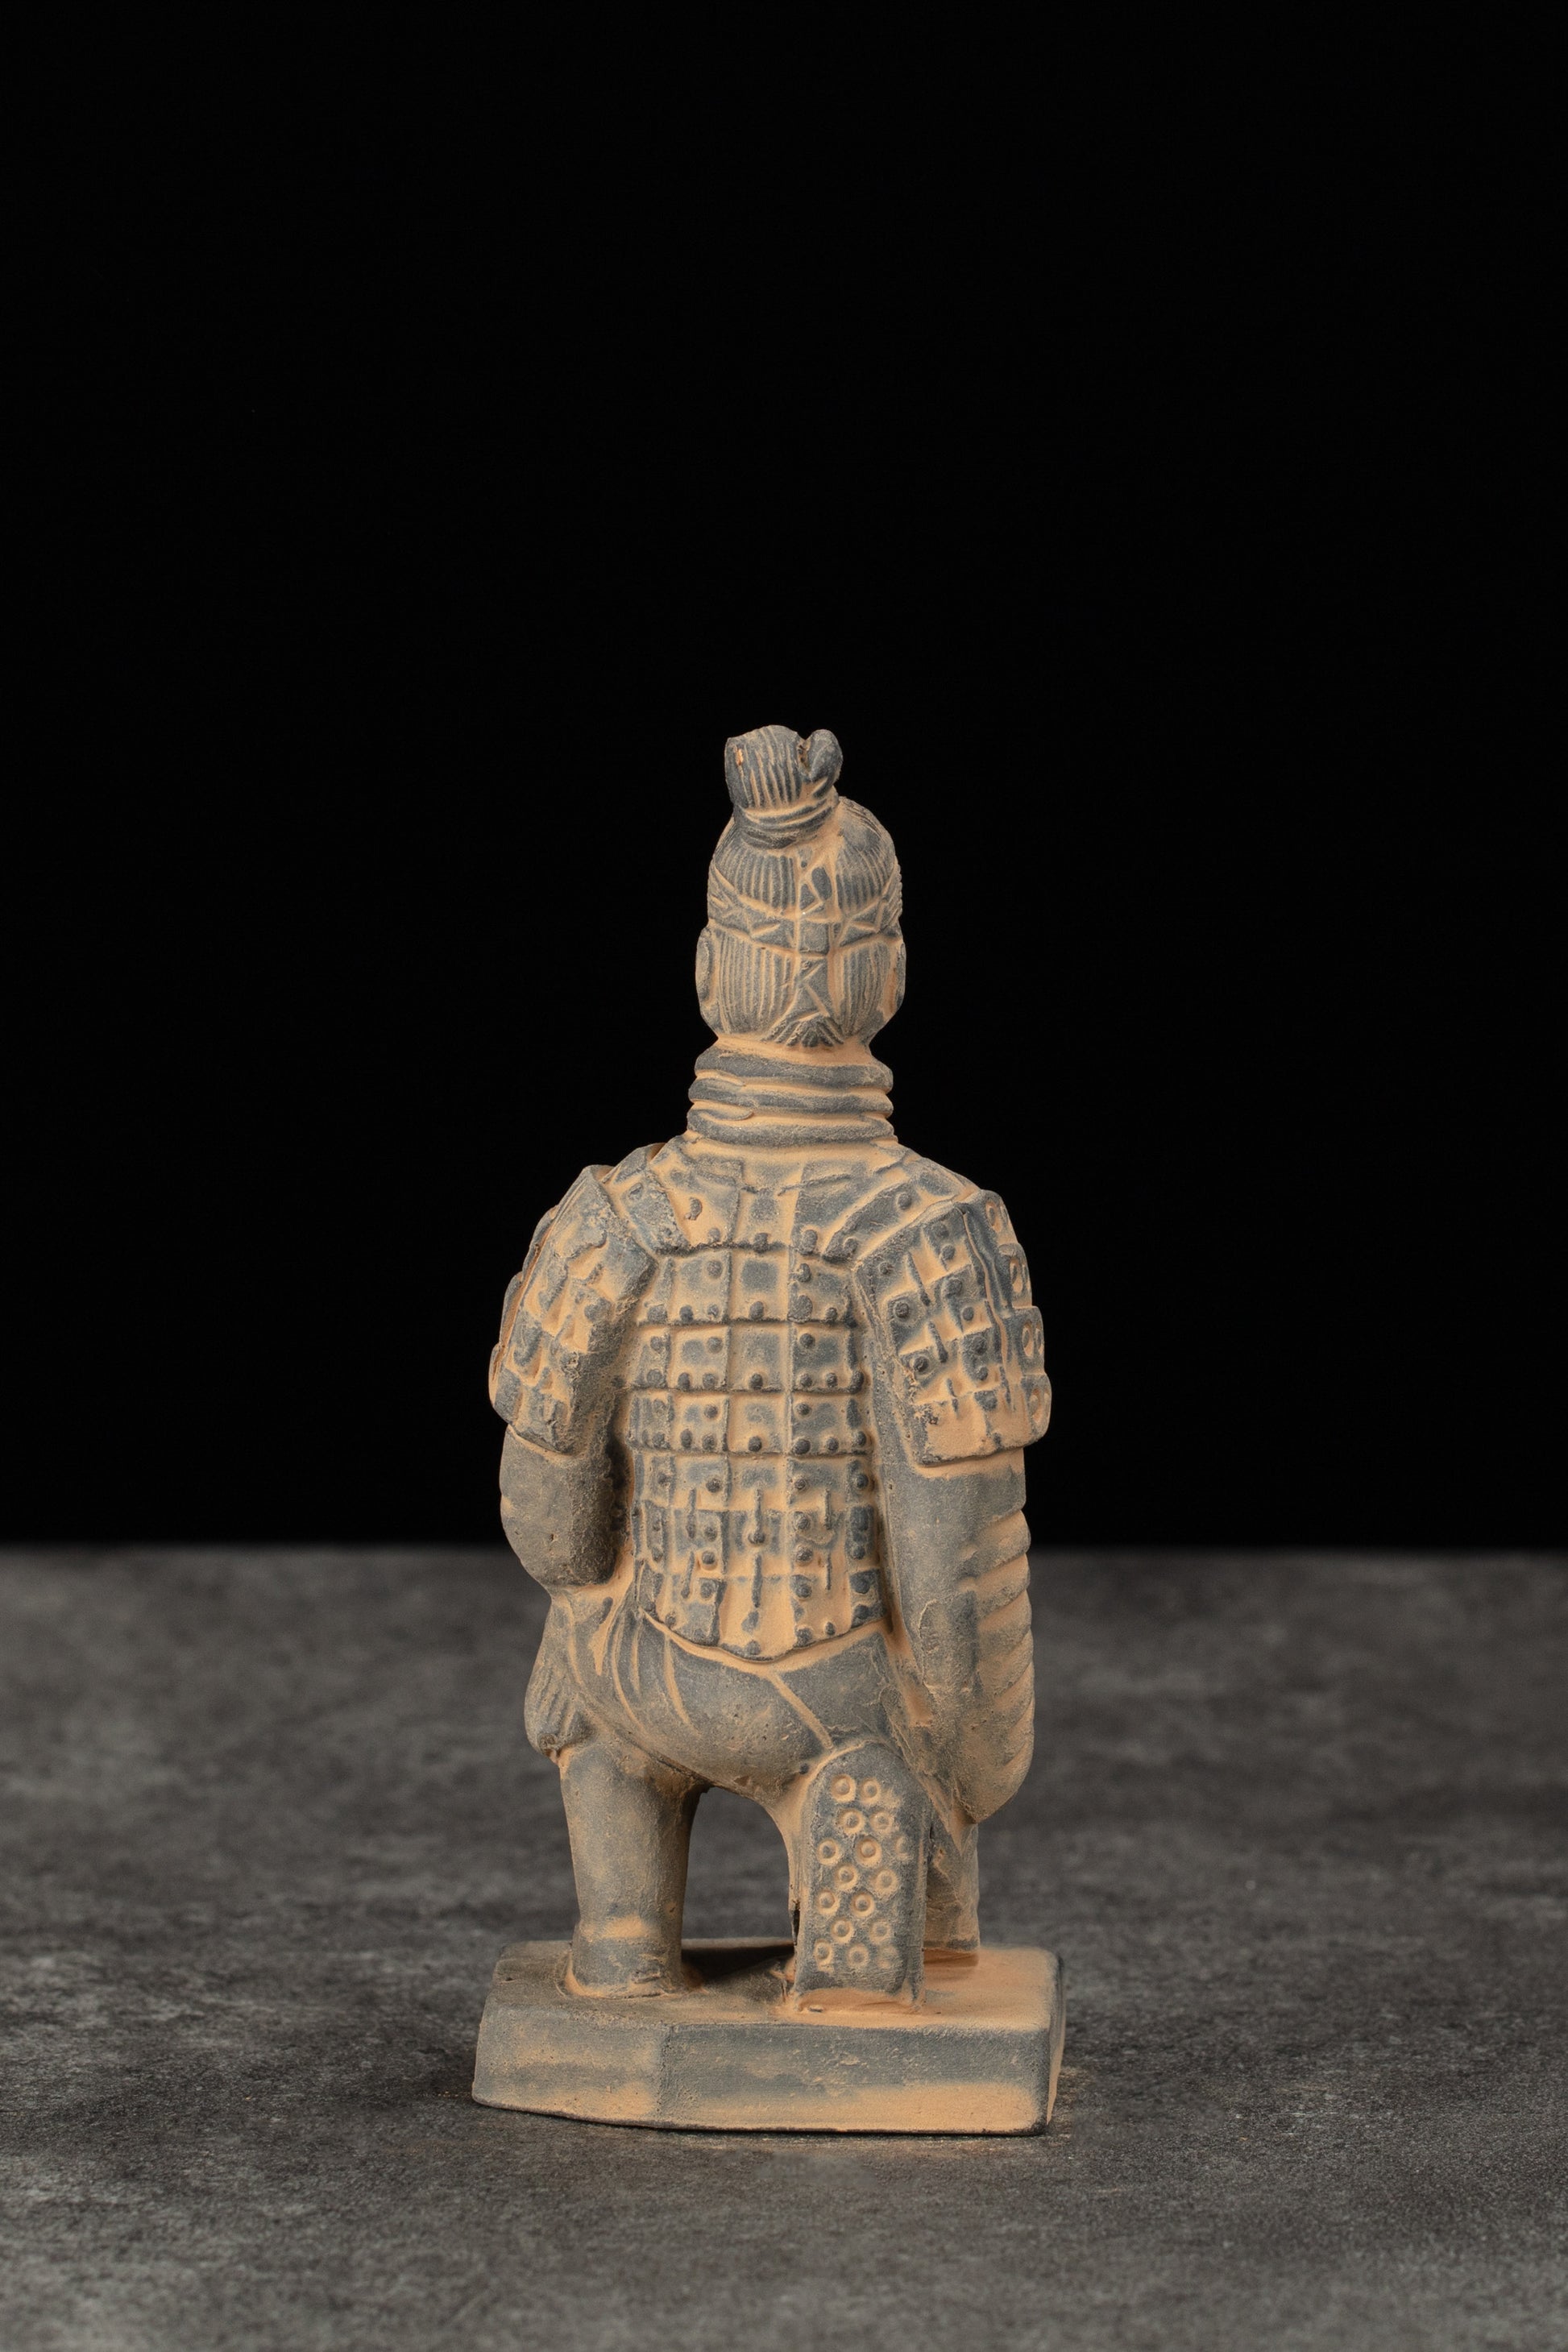 15CM Kneeling Archer - CLAYARMY-Back view focusing on the intricacies of the 15CM Kneeling Archer's sculpted robe and accessories.